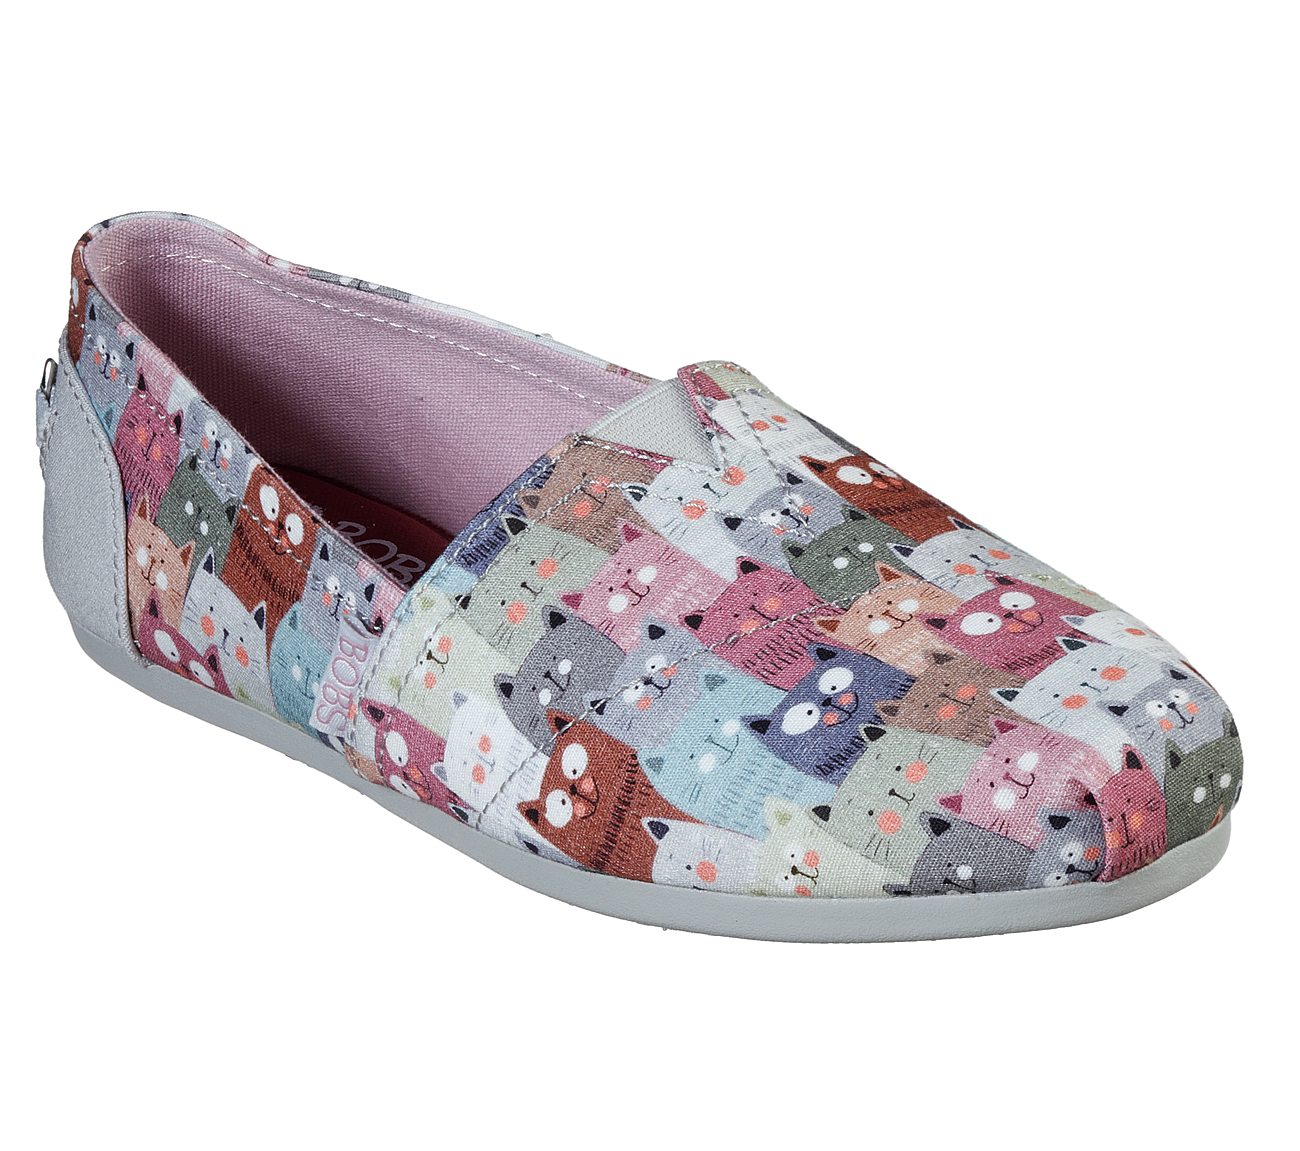 bobs pink cat shoes off 72% - online-sms.in